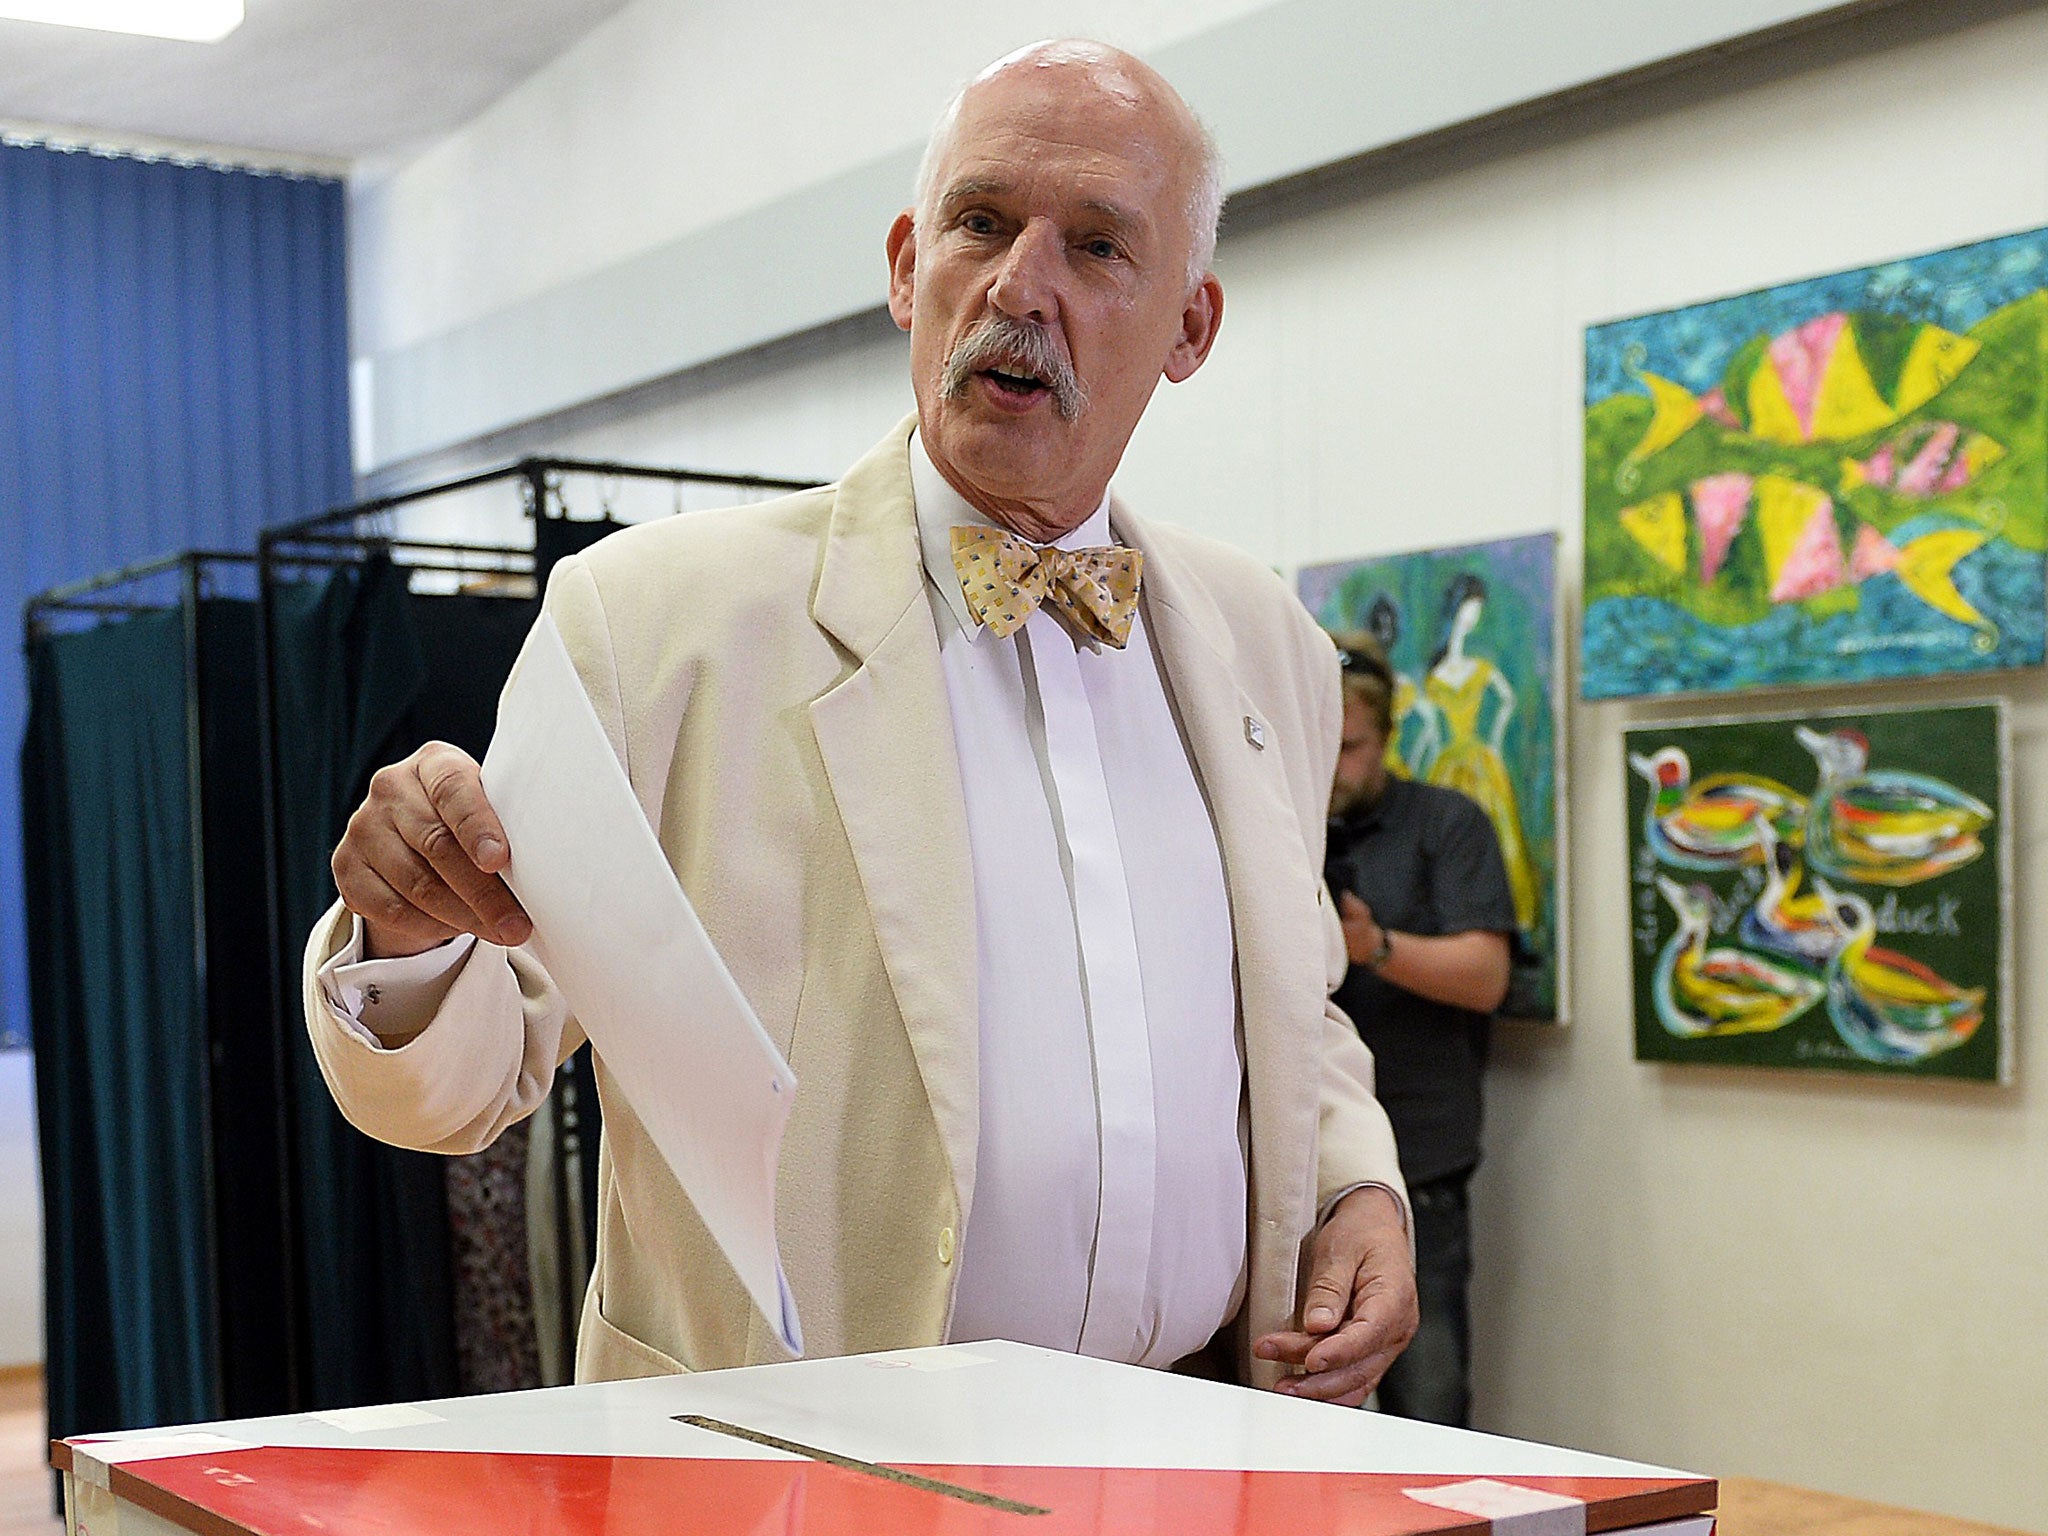 Janusz Korwin-Mikke, leader of the eurosceptic Congress of the New Right party, casts his ballot for the European Parliament elections on May 25, 2014